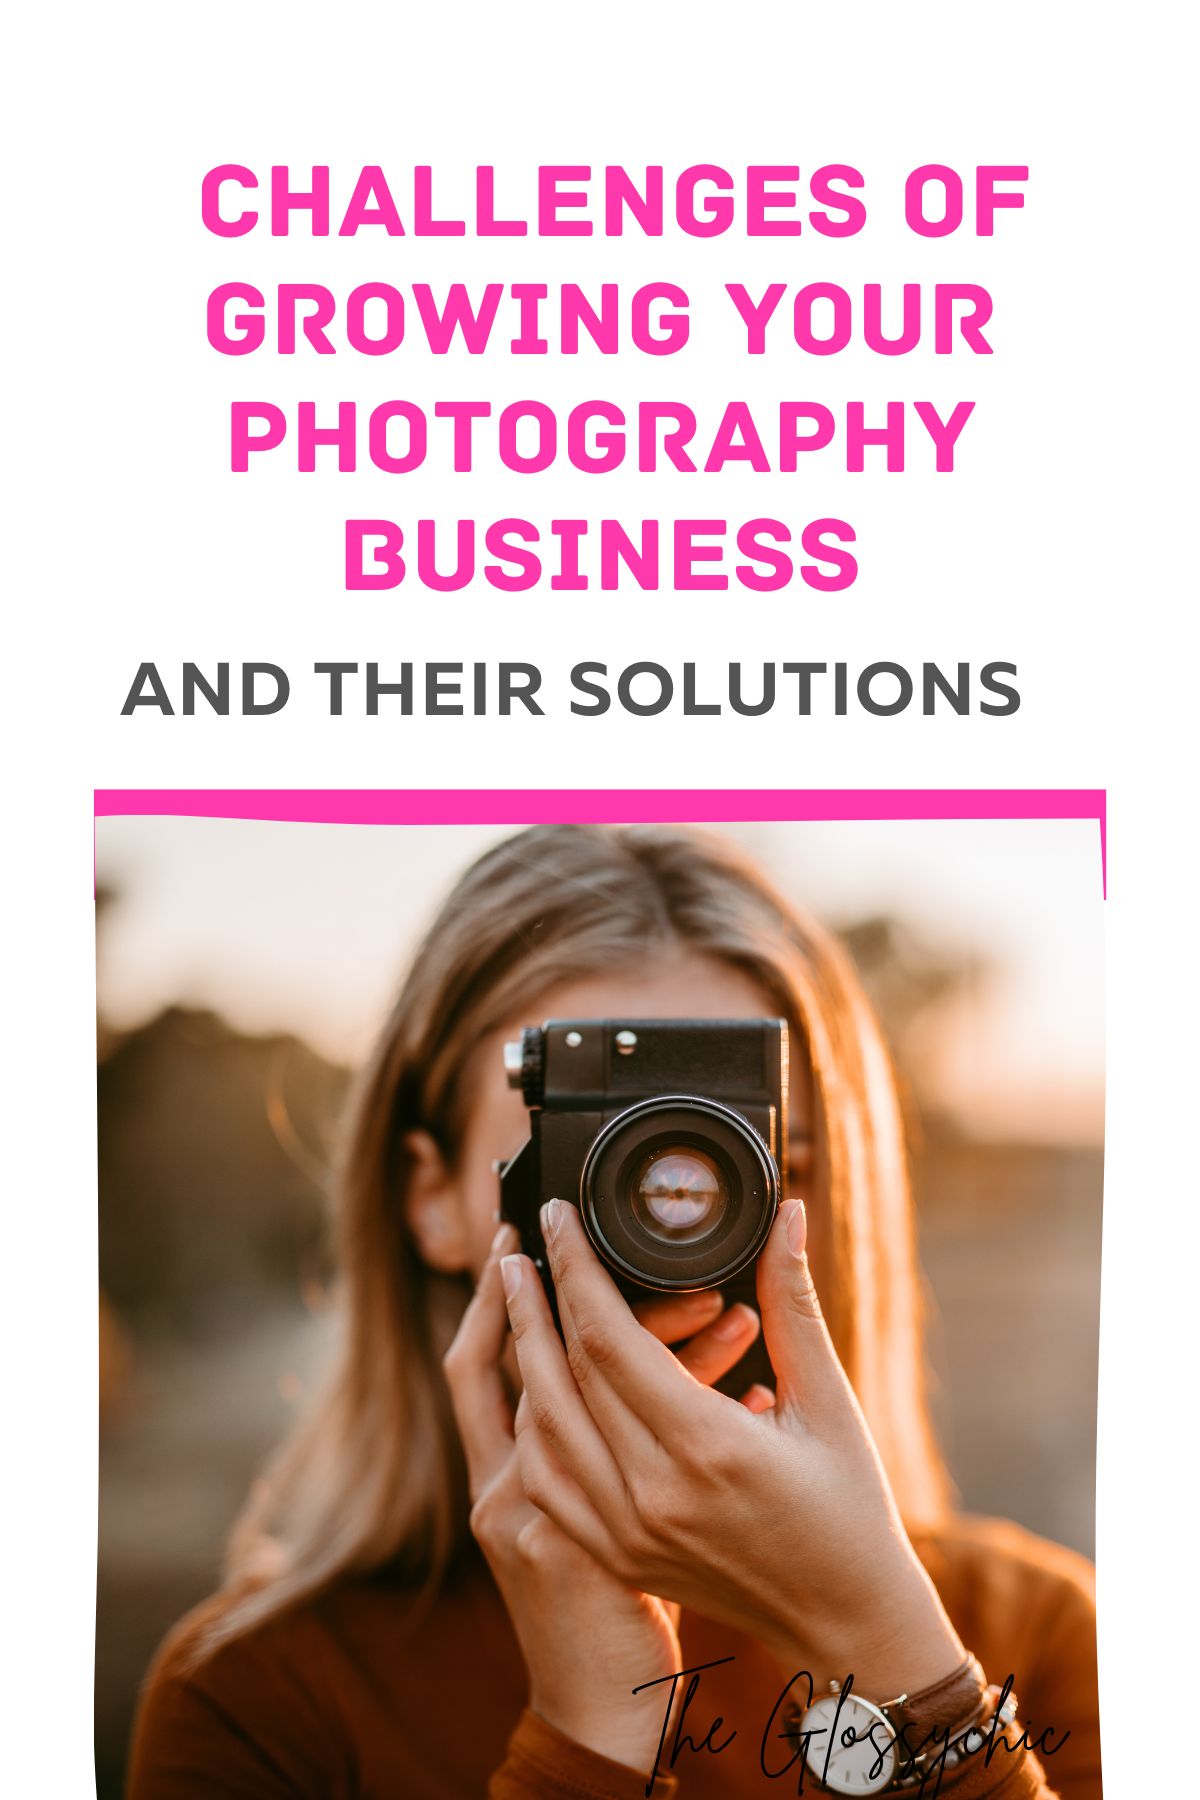 Solutions To Challenges Of Growing Your Photography Business